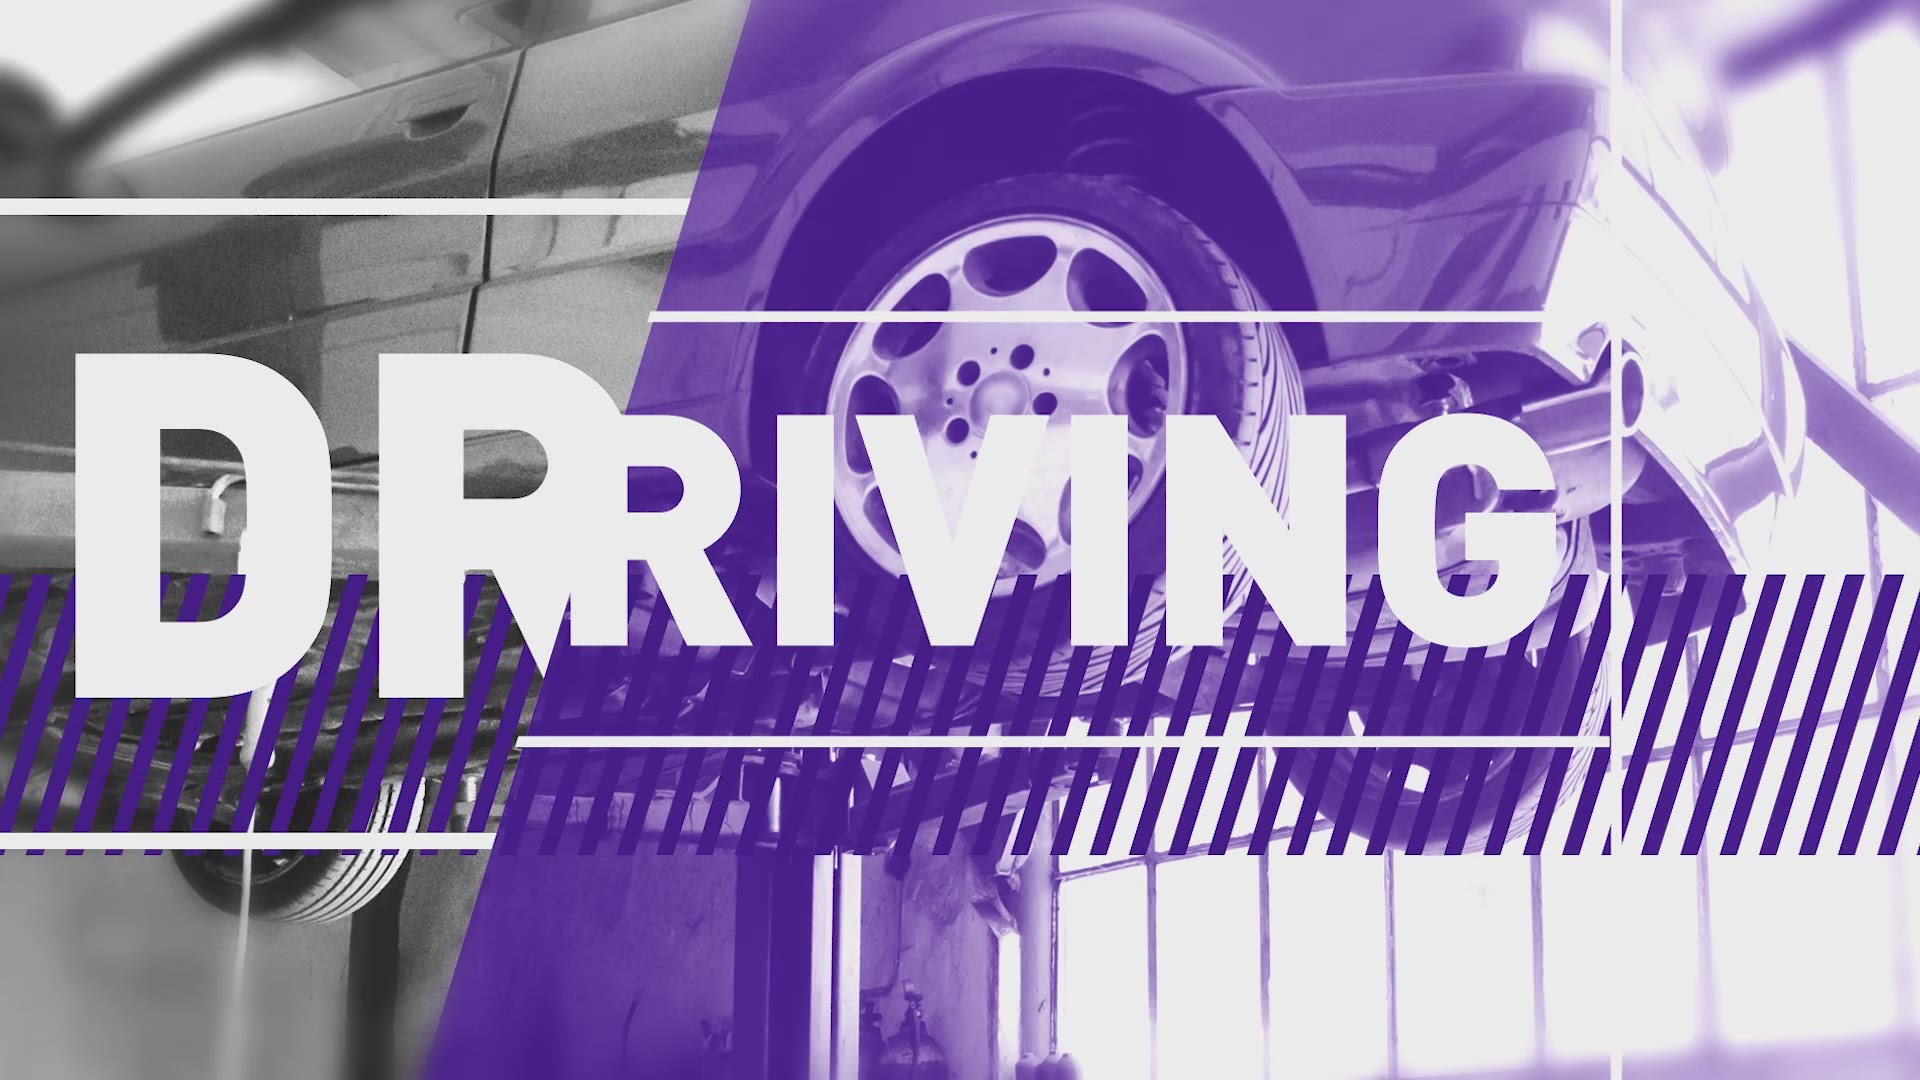 Learn how to clear ice and snow off your vehicle correctly in this week's Driving Smart.